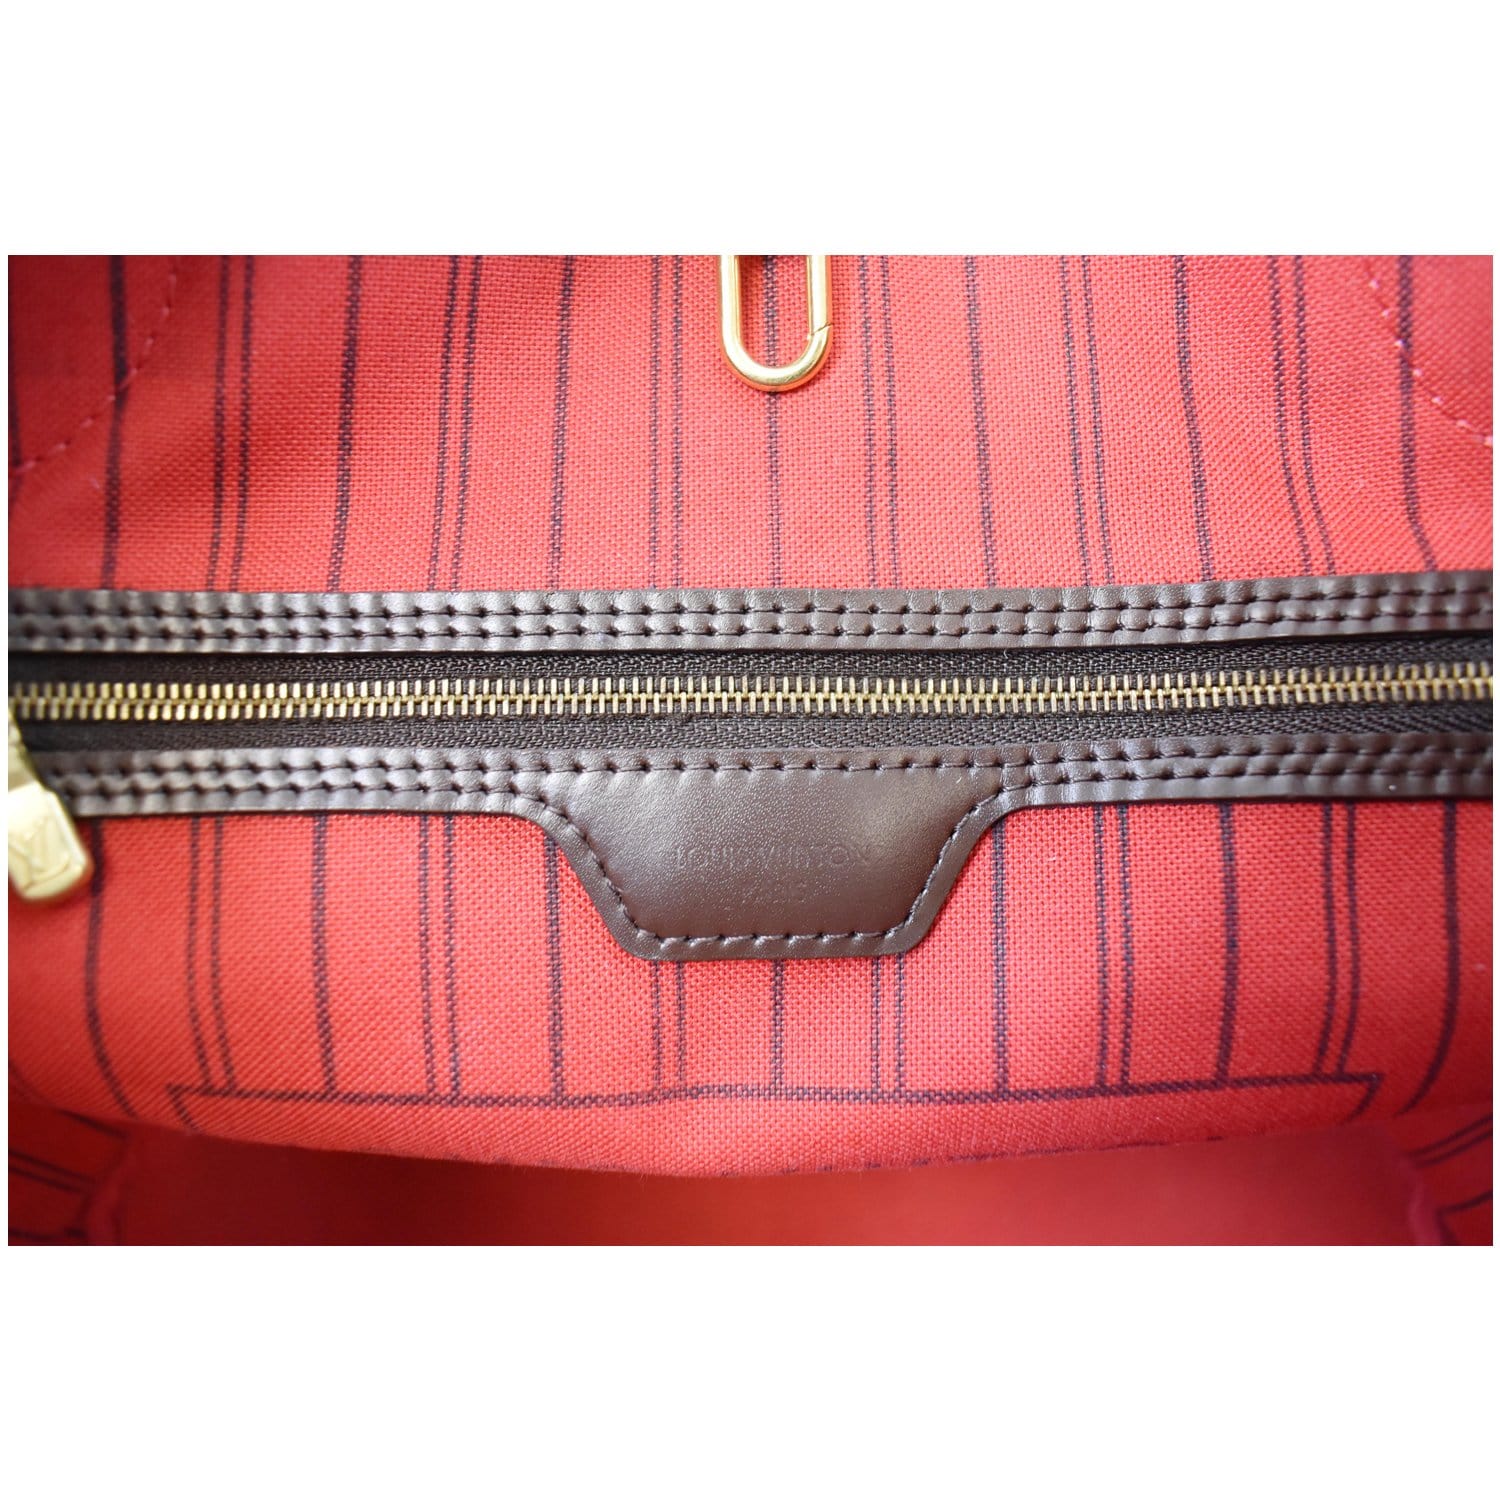 Louis Vuitton lv neverfull mm shopping carry bag original leather version  damier ebene with red int…